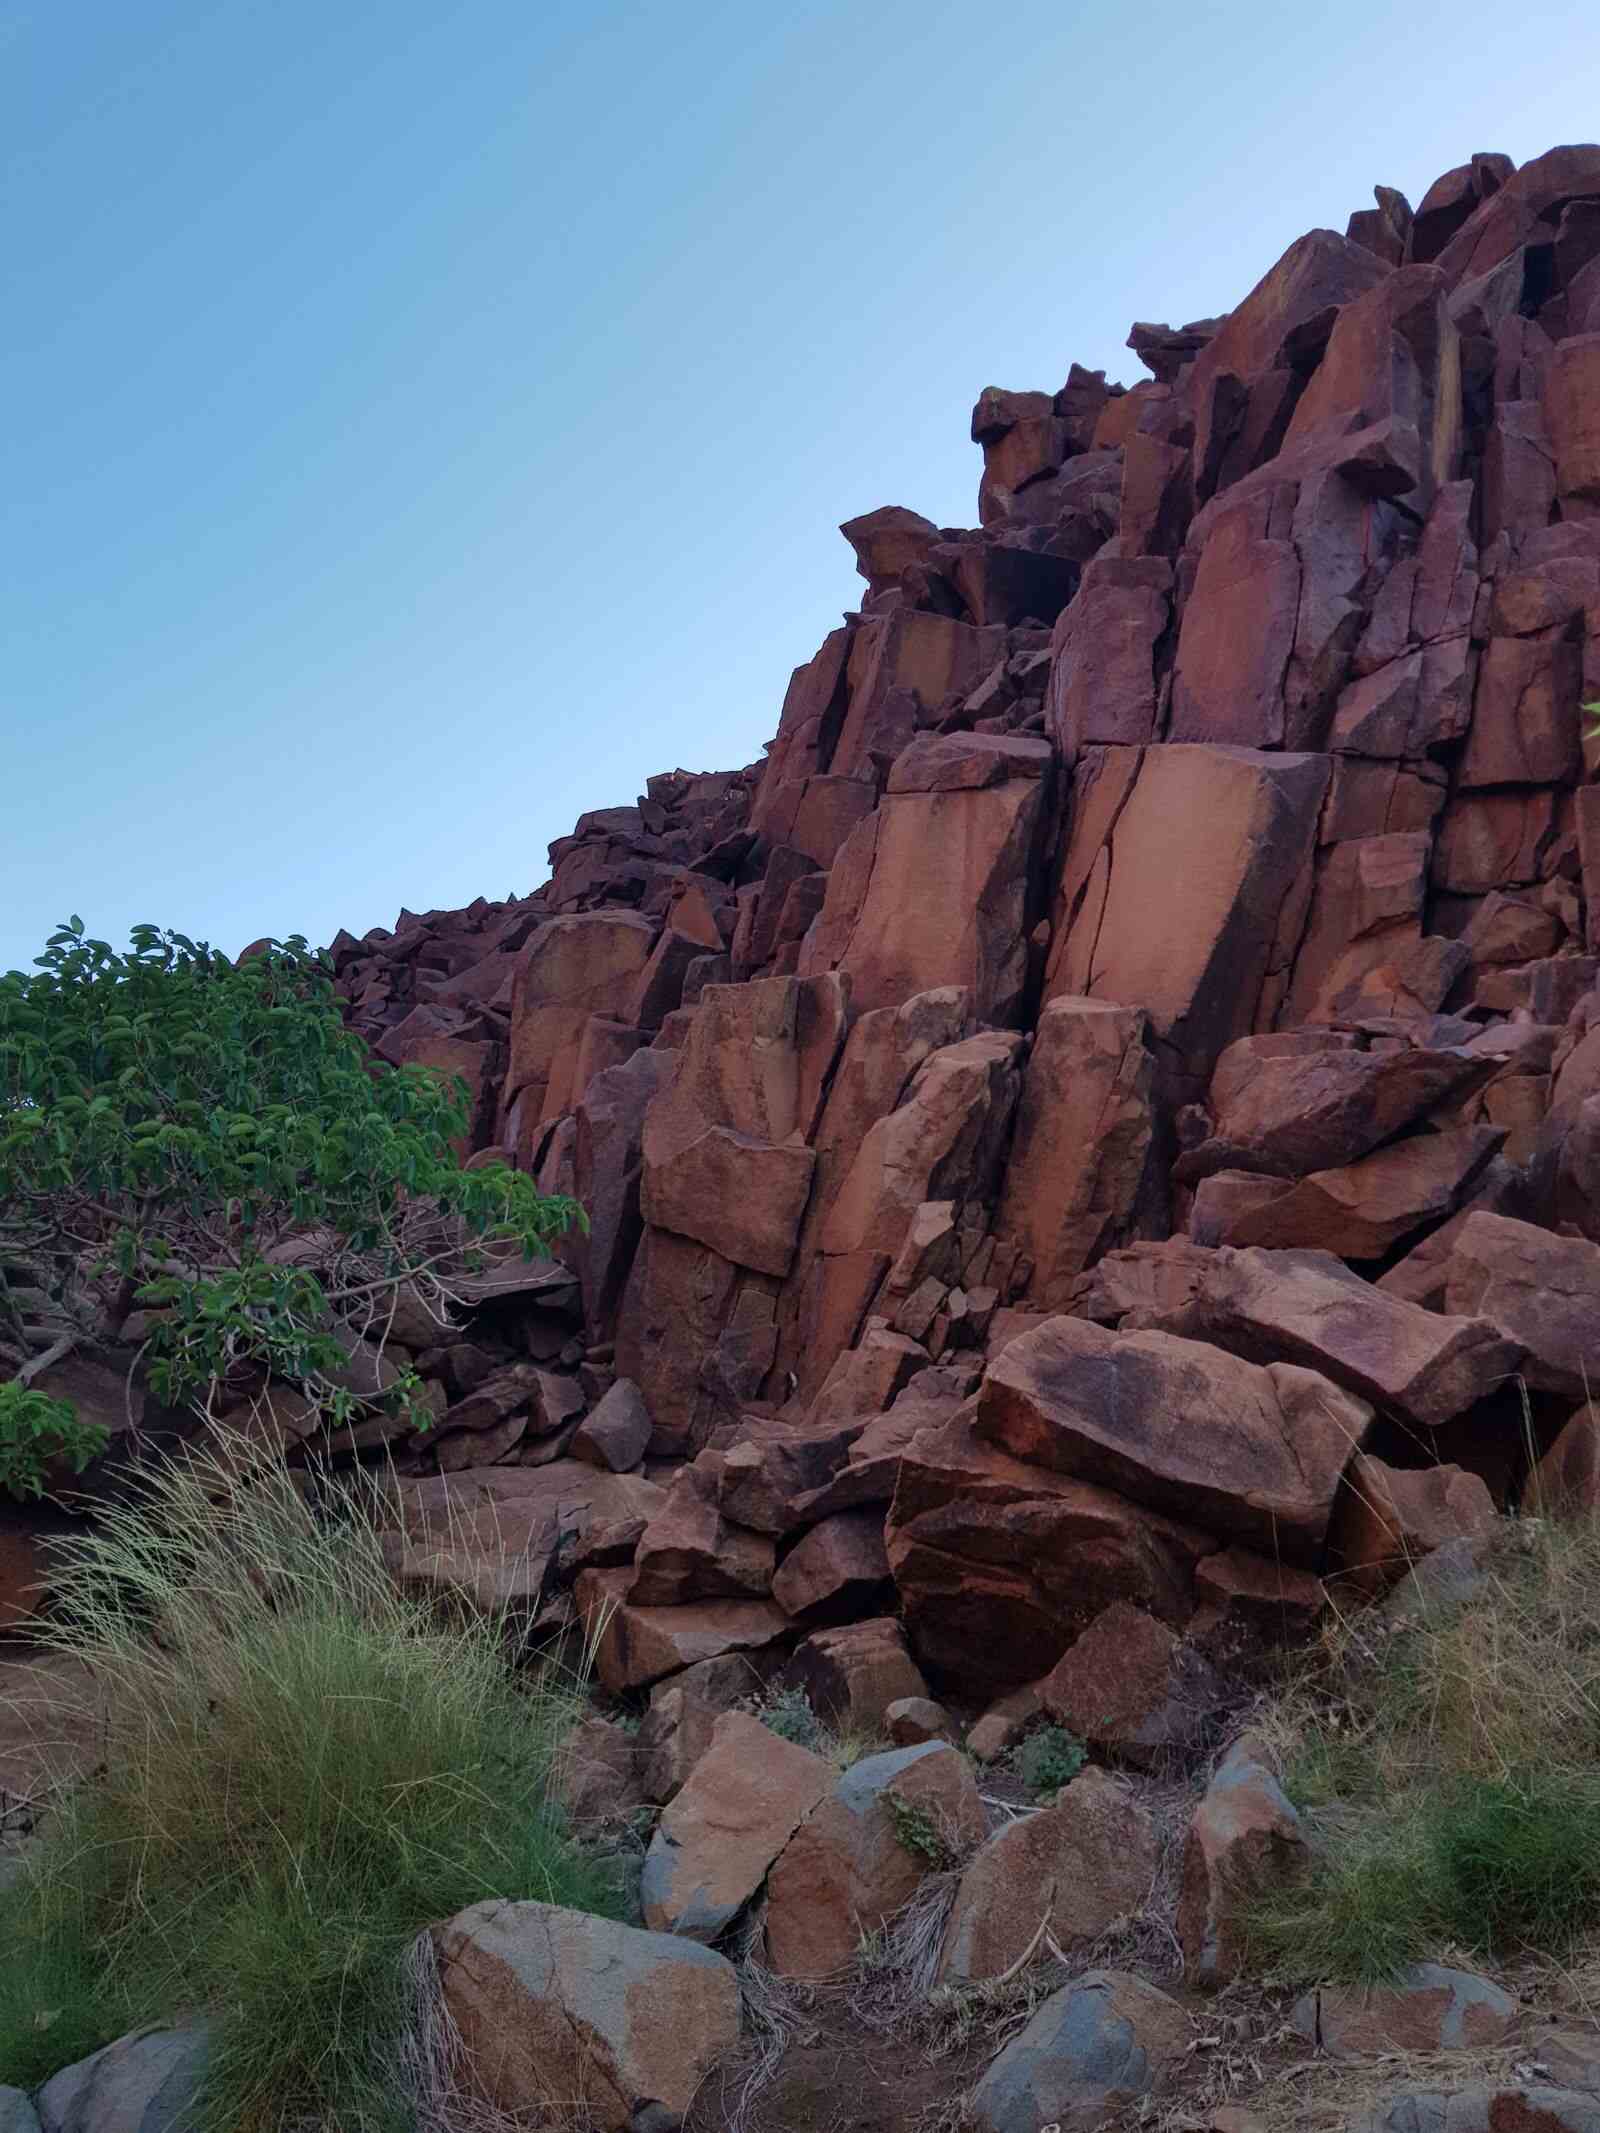 Pilbara gorge rock formation, deep red rusted rock